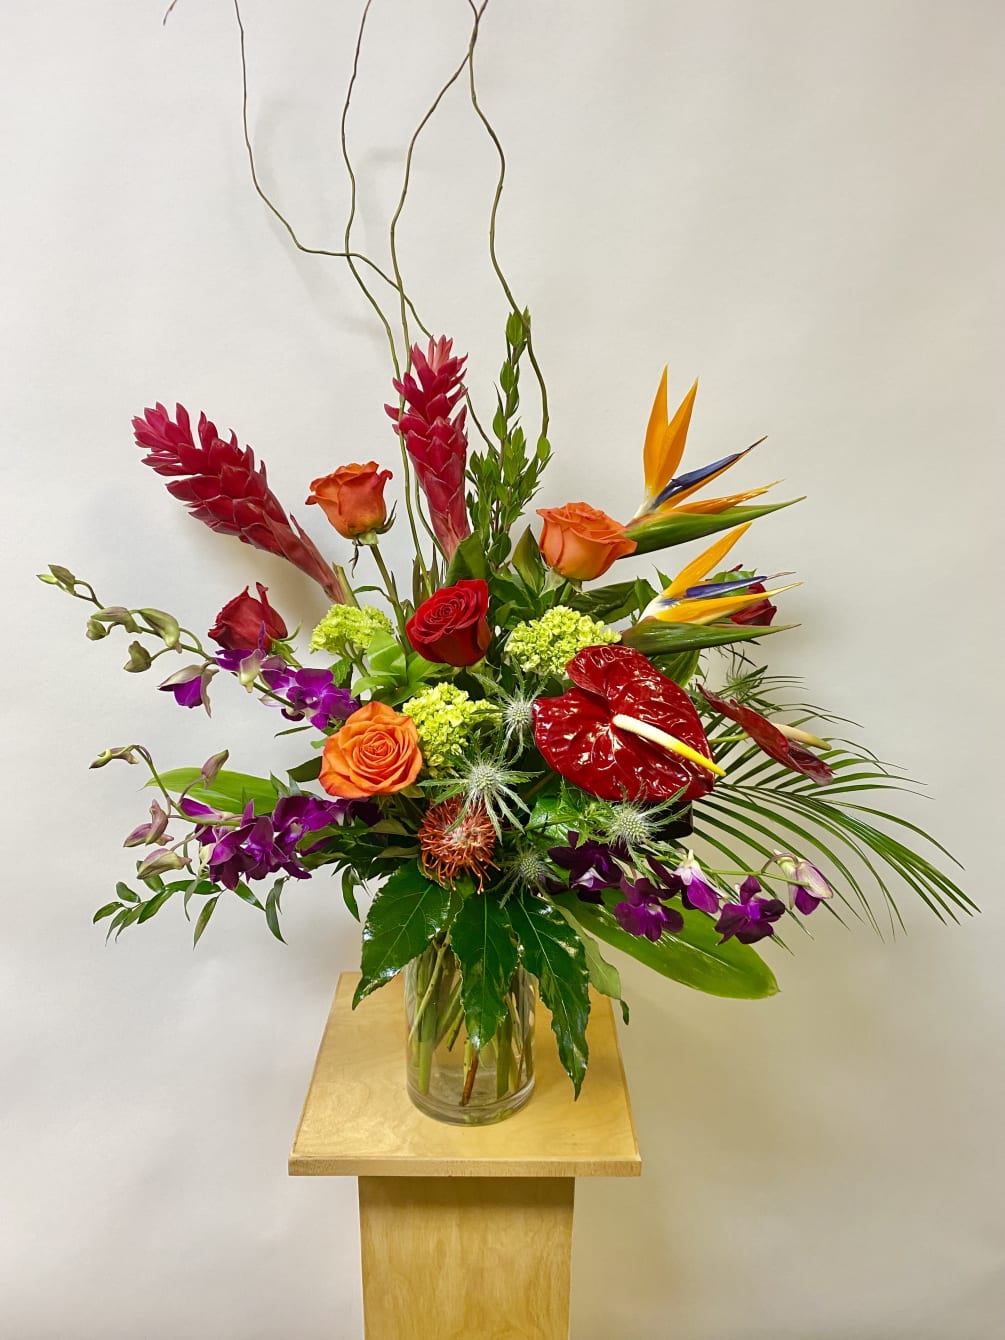 This Tall Tropical Arrangement includes Birds of Paradise, Red Ginger, Red Anthurium